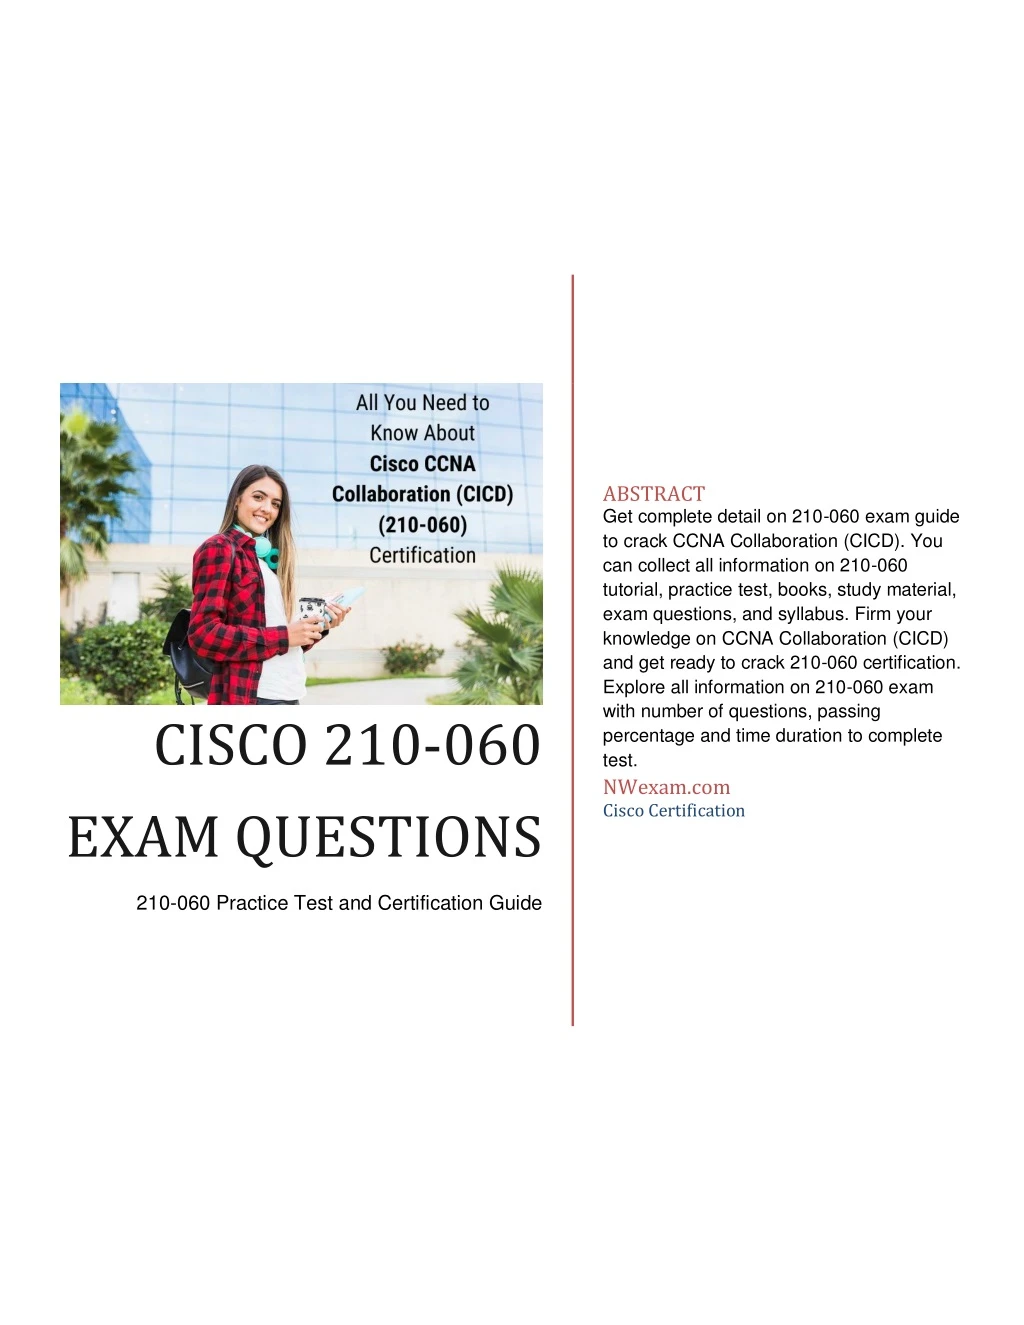 abstract get complete detail on 210 060 exam